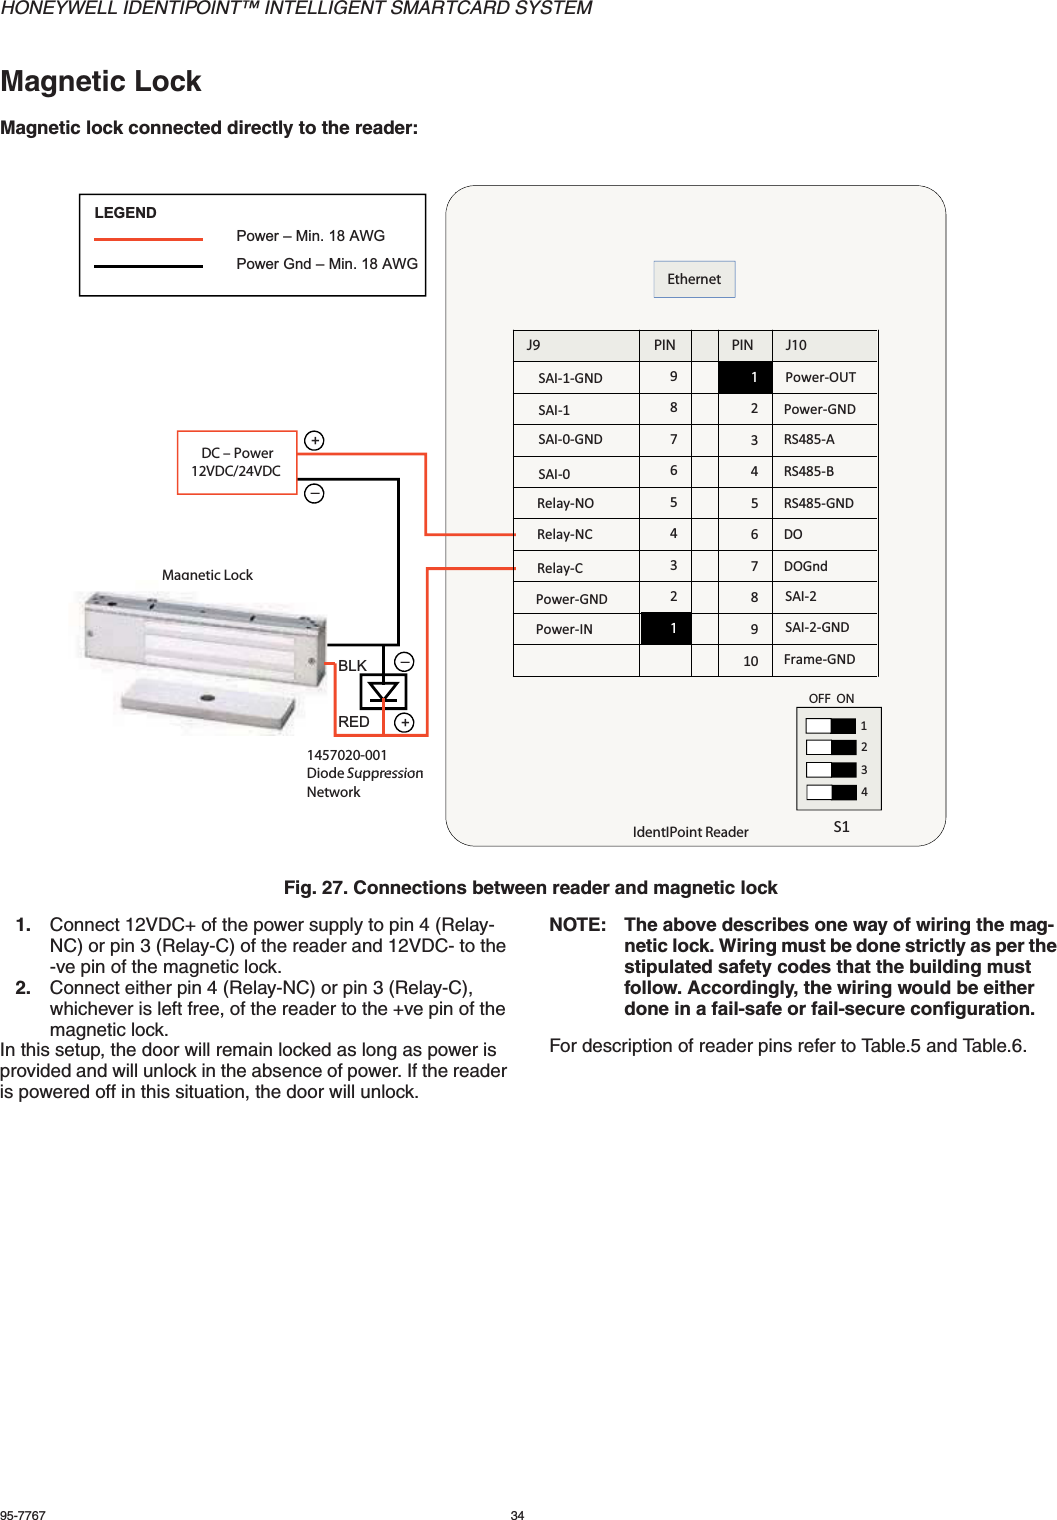 HONEYWELL IDENTIPOINT™ INTELLIGENT SMARTCARD SYSTEM95-7767 34Magnetic LockMagnetic lock connected directly to the reader:Fig. 27. Connections between reader and magnetic lock1. Connect 12VDC+ of the power supply to pin 4 (Relay-NC) or pin 3 (Relay-C) of the reader and 12VDC- to the -ve pin of the magnetic lock.2. Connect either pin 4 (Relay-NC) or pin 3 (Relay-C), whichever is left free, of the reader to the +ve pin of the magnetic lock.In this setup, the door will remain locked as long as power is provided and will unlock in the absence of power. If the reader is powered off in this situation, the door will unlock.NOTE: The above describes one way of wiring the mag-netic lock. Wiring must be done strictly as per the stipulated safety codes that the building must follow. Accordingly, the wiring would be either done in a fail-safe or fail-secure configuration.For description of reader pins refer to Table.5 and Table.6.Power – Min. 18 AWGPower Gnd – Min. 18 AWGLEGENDEthernetPower-OUTSAI-1-GNDPower-GNDSAI-1RS485-ASAI-0-GNDRS485-BSAI-0 64738291J10PINPINJ9DC – Power12VDC/24VDC+Magnetic Lock192837465RS485-GND5ON-yaleRDORelay-NCDOGndRelay-CSAI-2Power-GNDSAI2GNDPo erIN_123OFF  ON19SAI-2-GNDPower-INFrame-GND101457020-001 Diode Suppression+_REDBLKS134IdentIPoint ReaderDiode Suppression Network